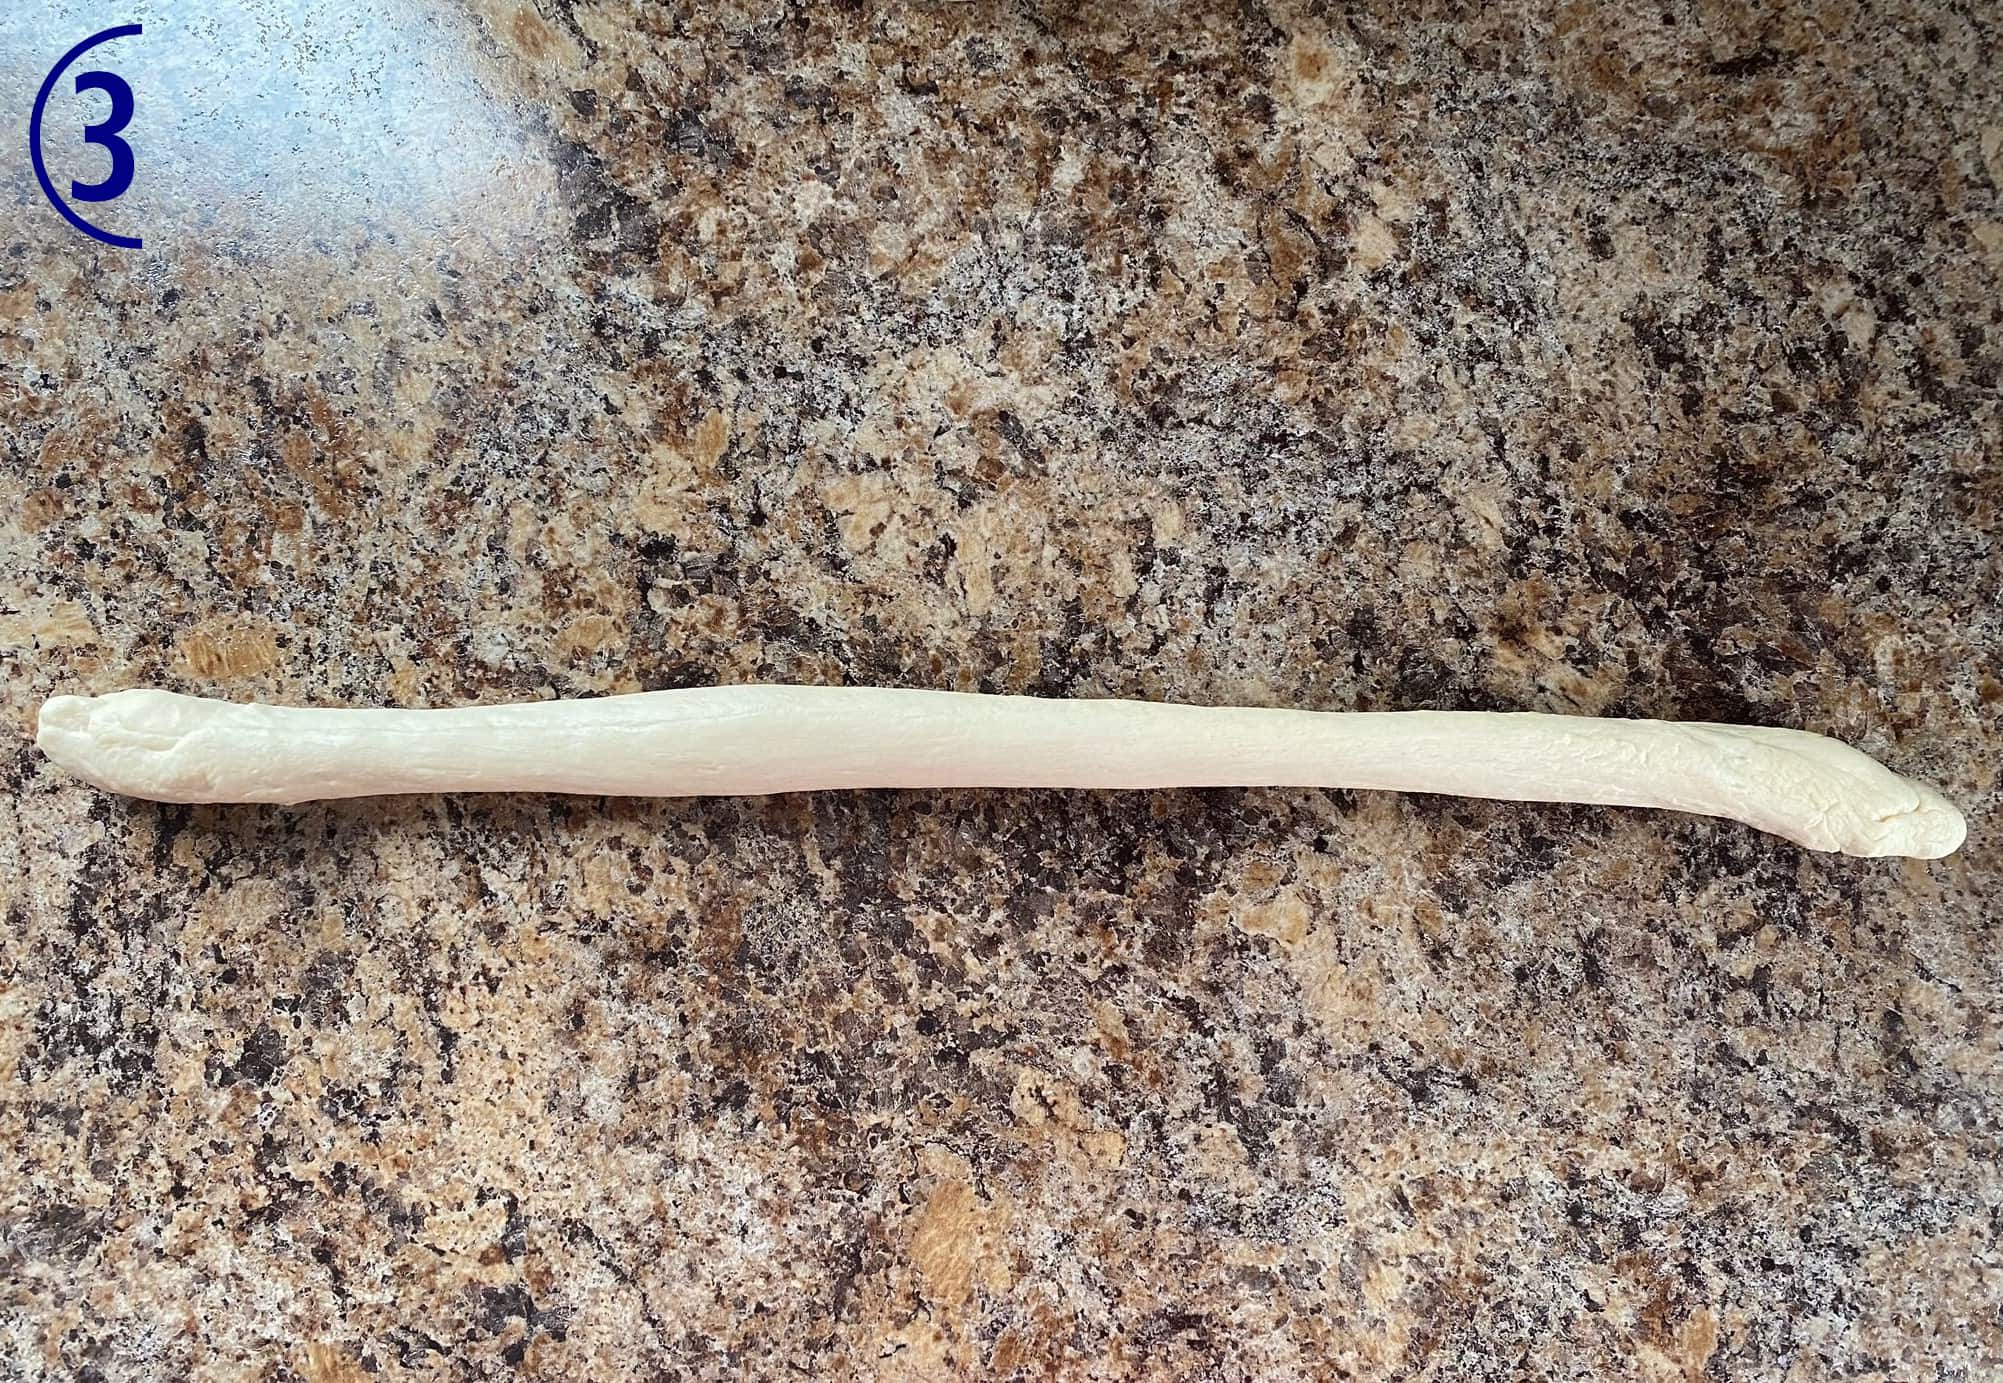 A piece of dough rolled out into a long thin rope.